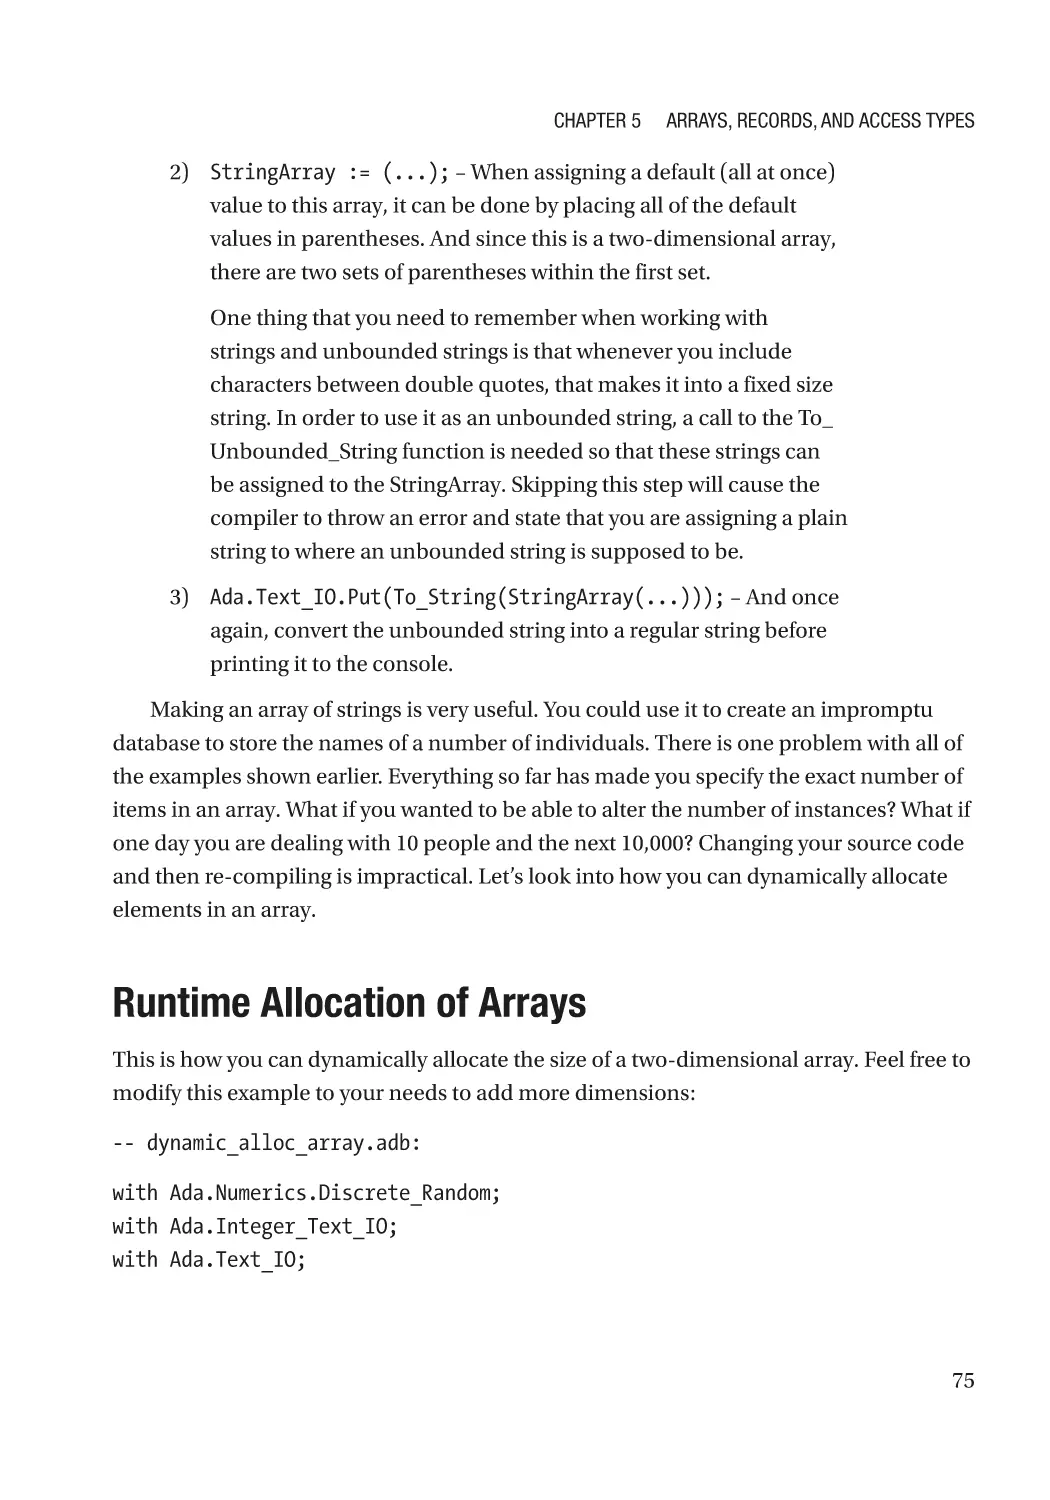 Runtime Allocation of Arrays